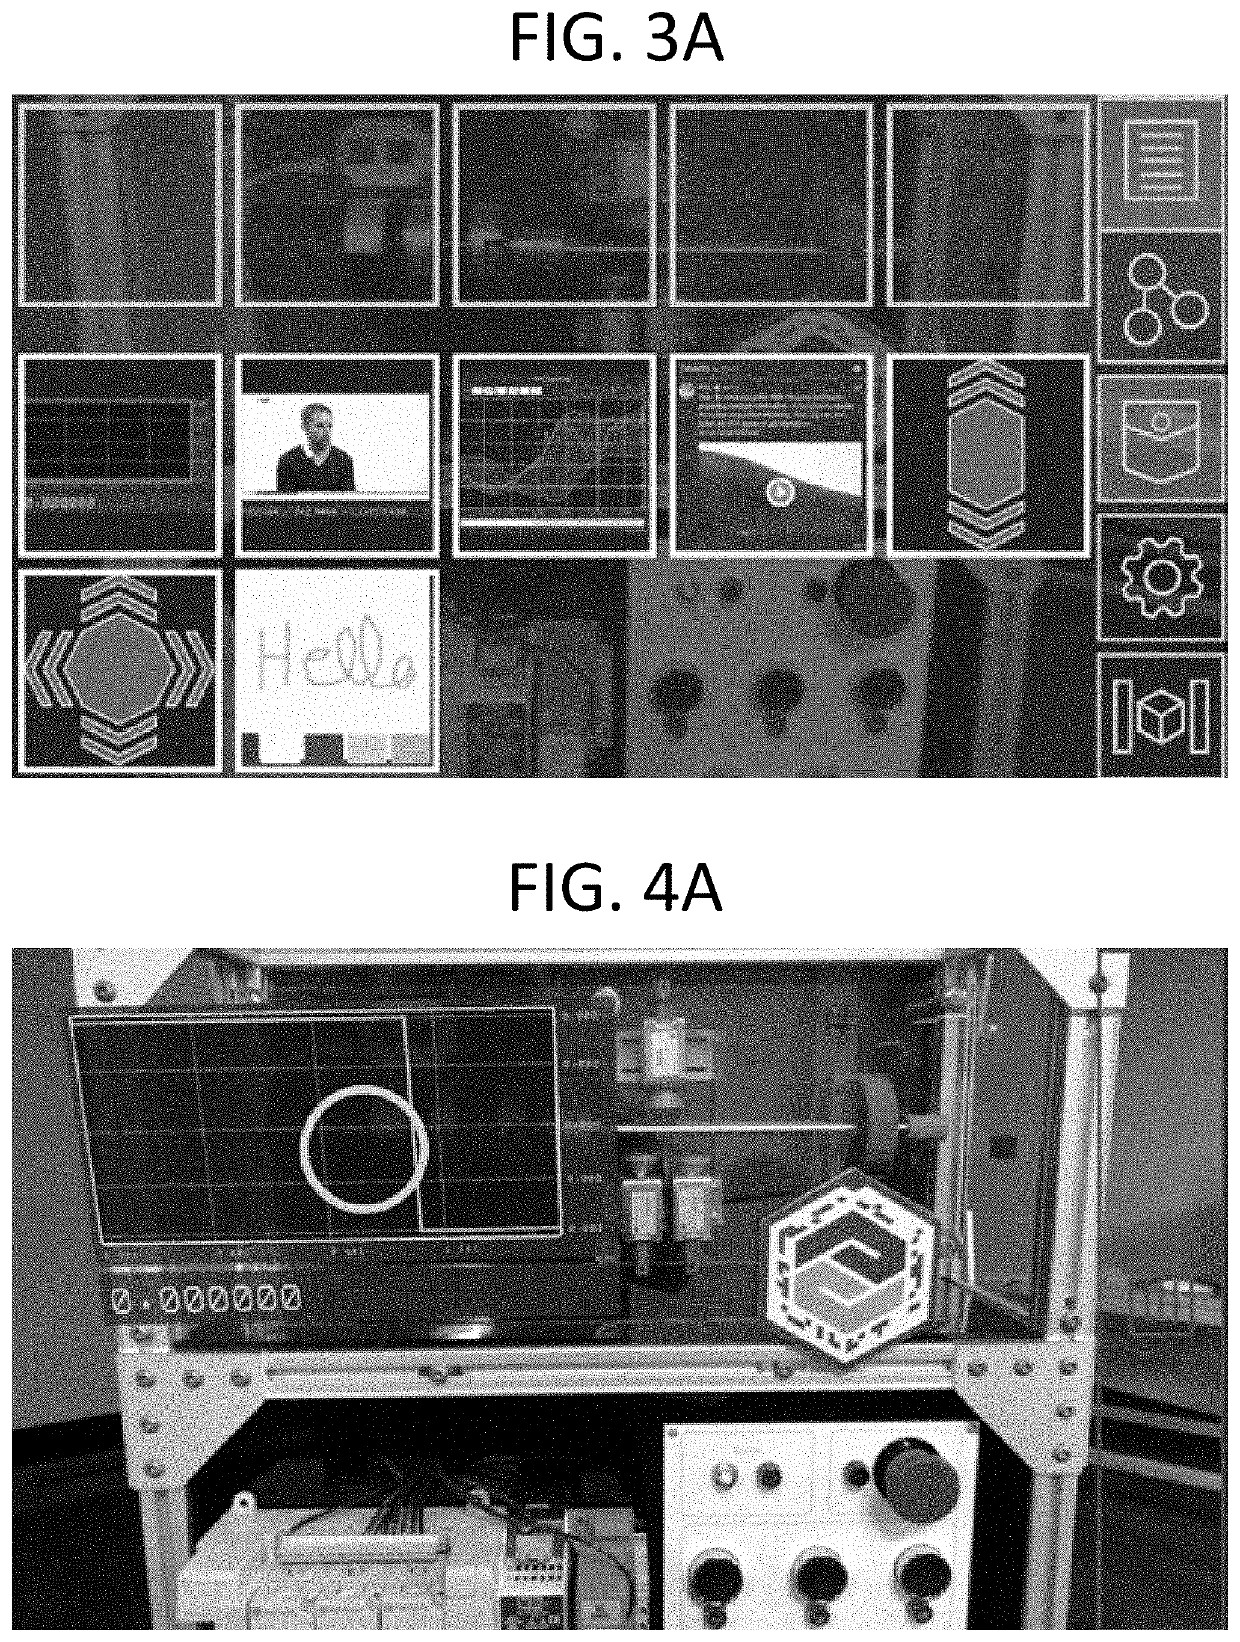 Transferring Graphic Objects Between Non-Augmented Reality and Augmented Reality Media Domains